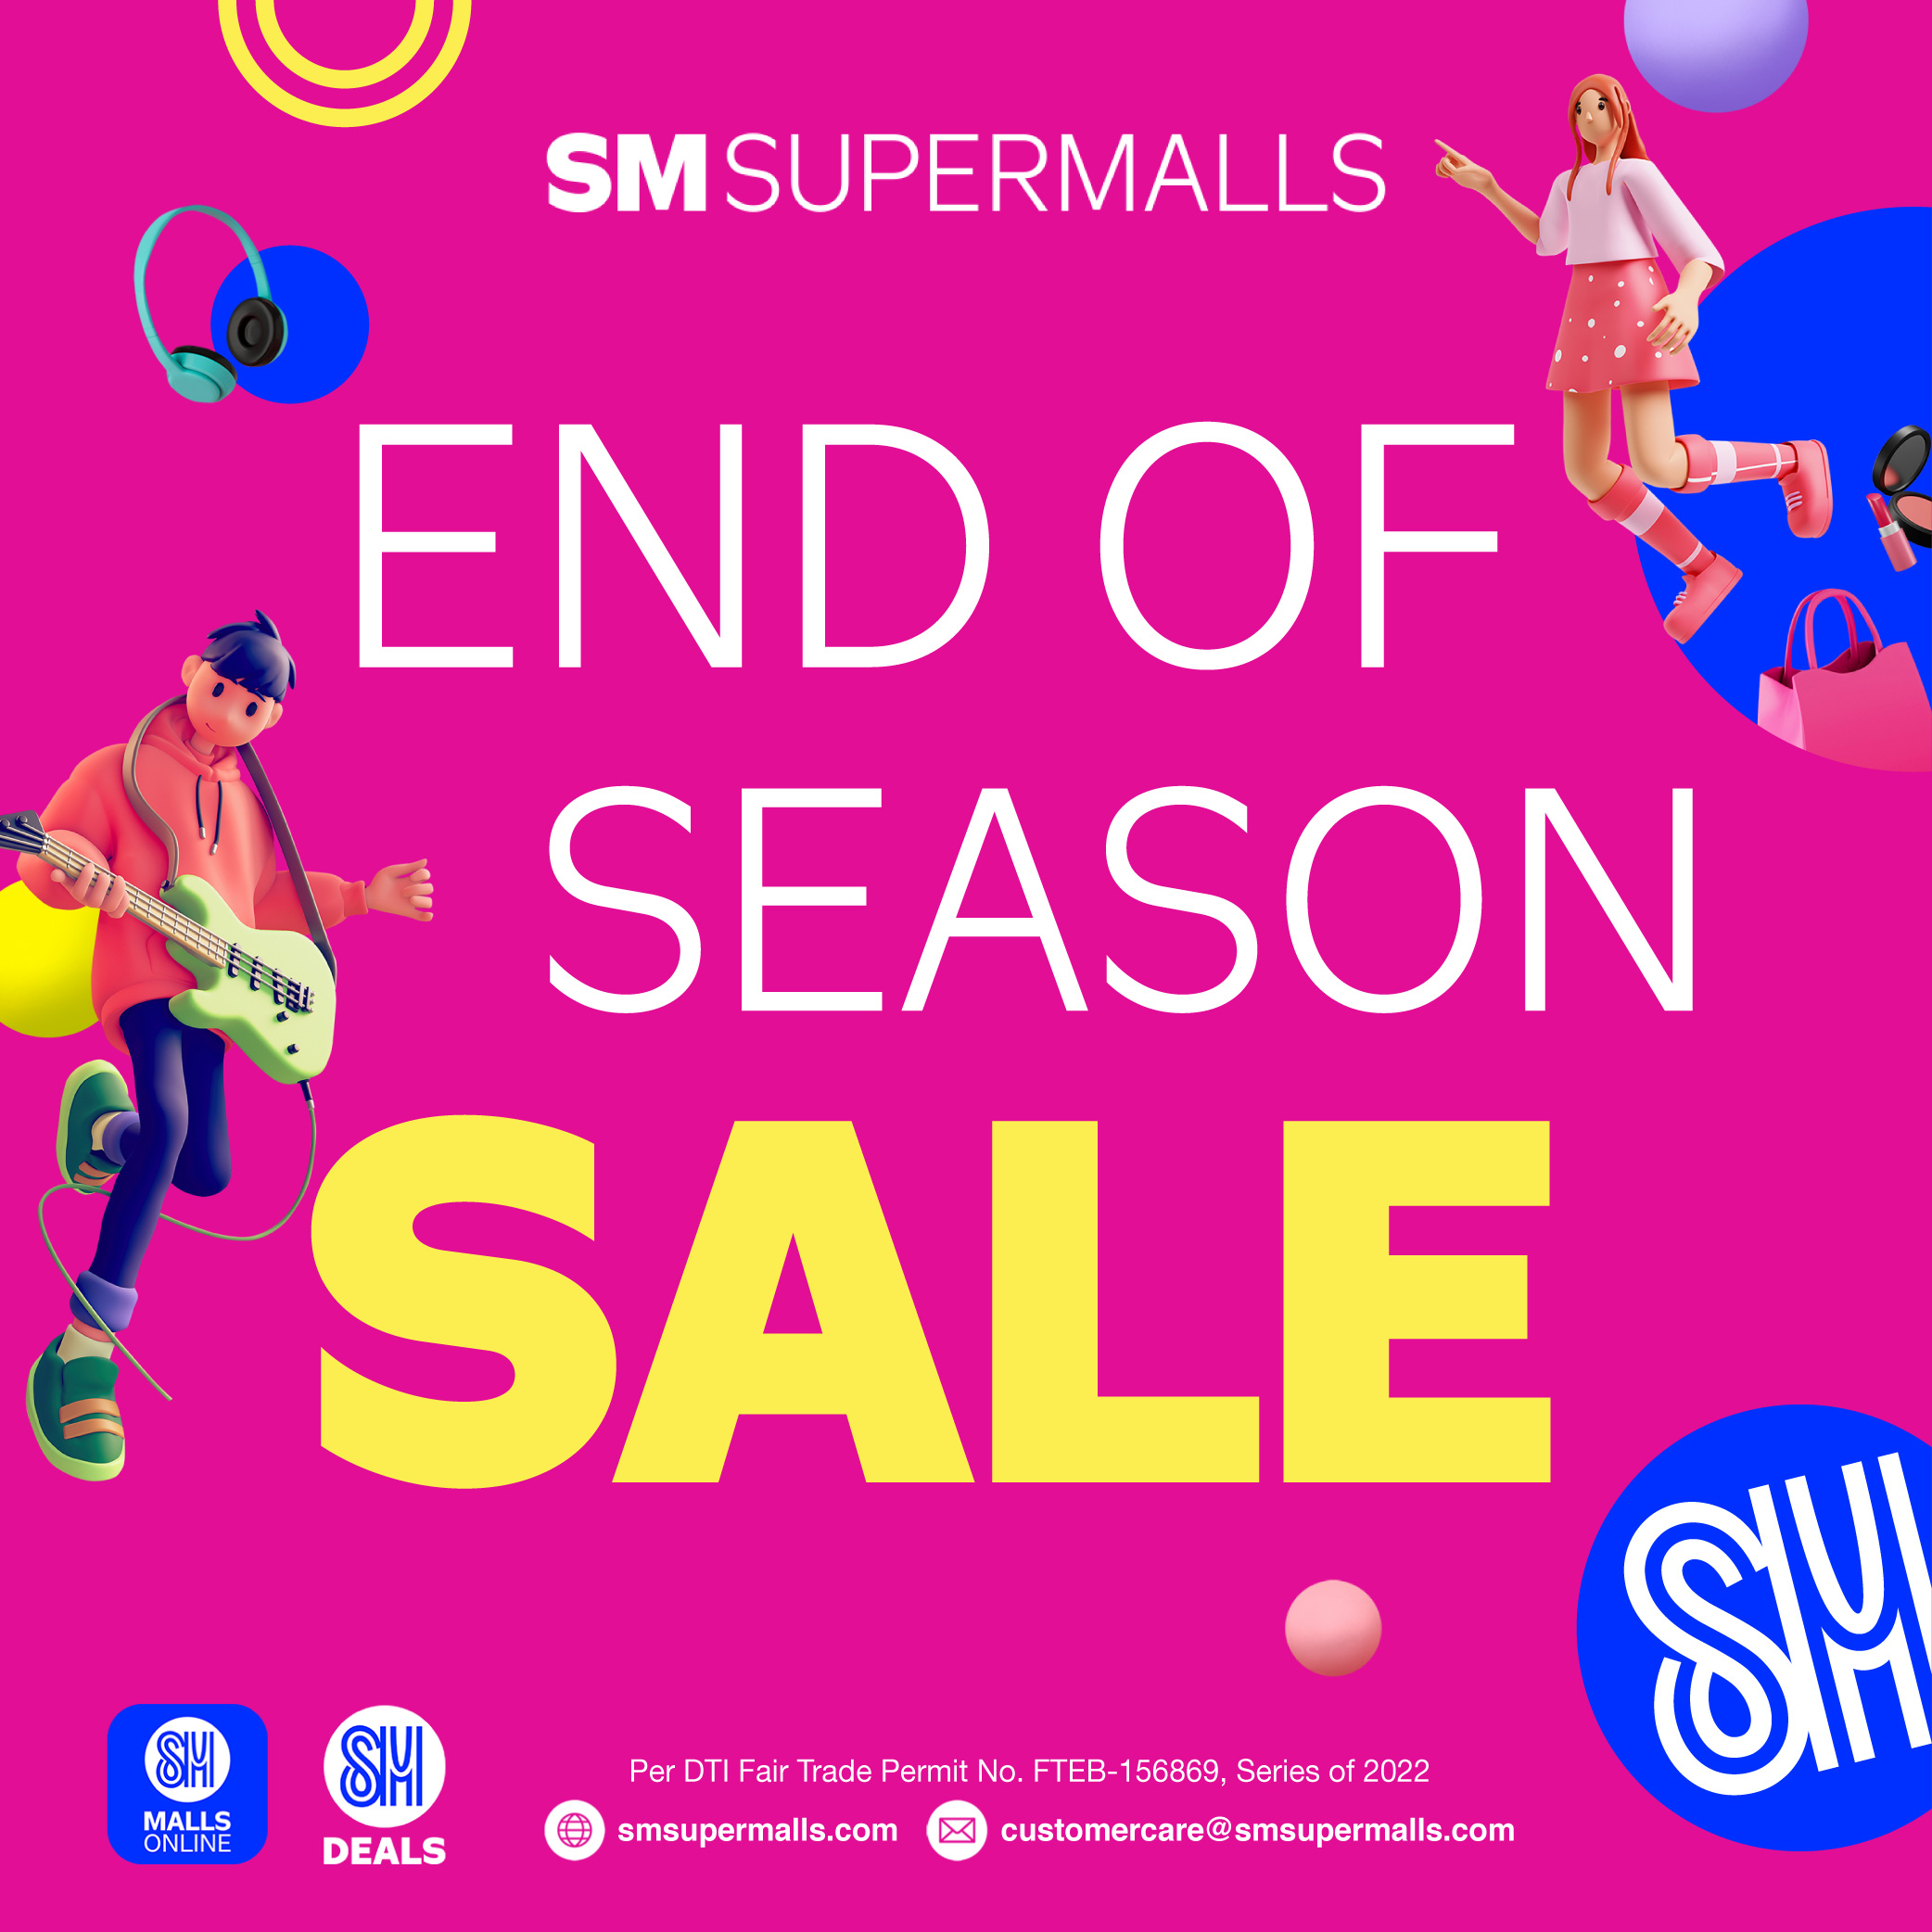 End of Season Sale this January 2-8, 2023 at SM!